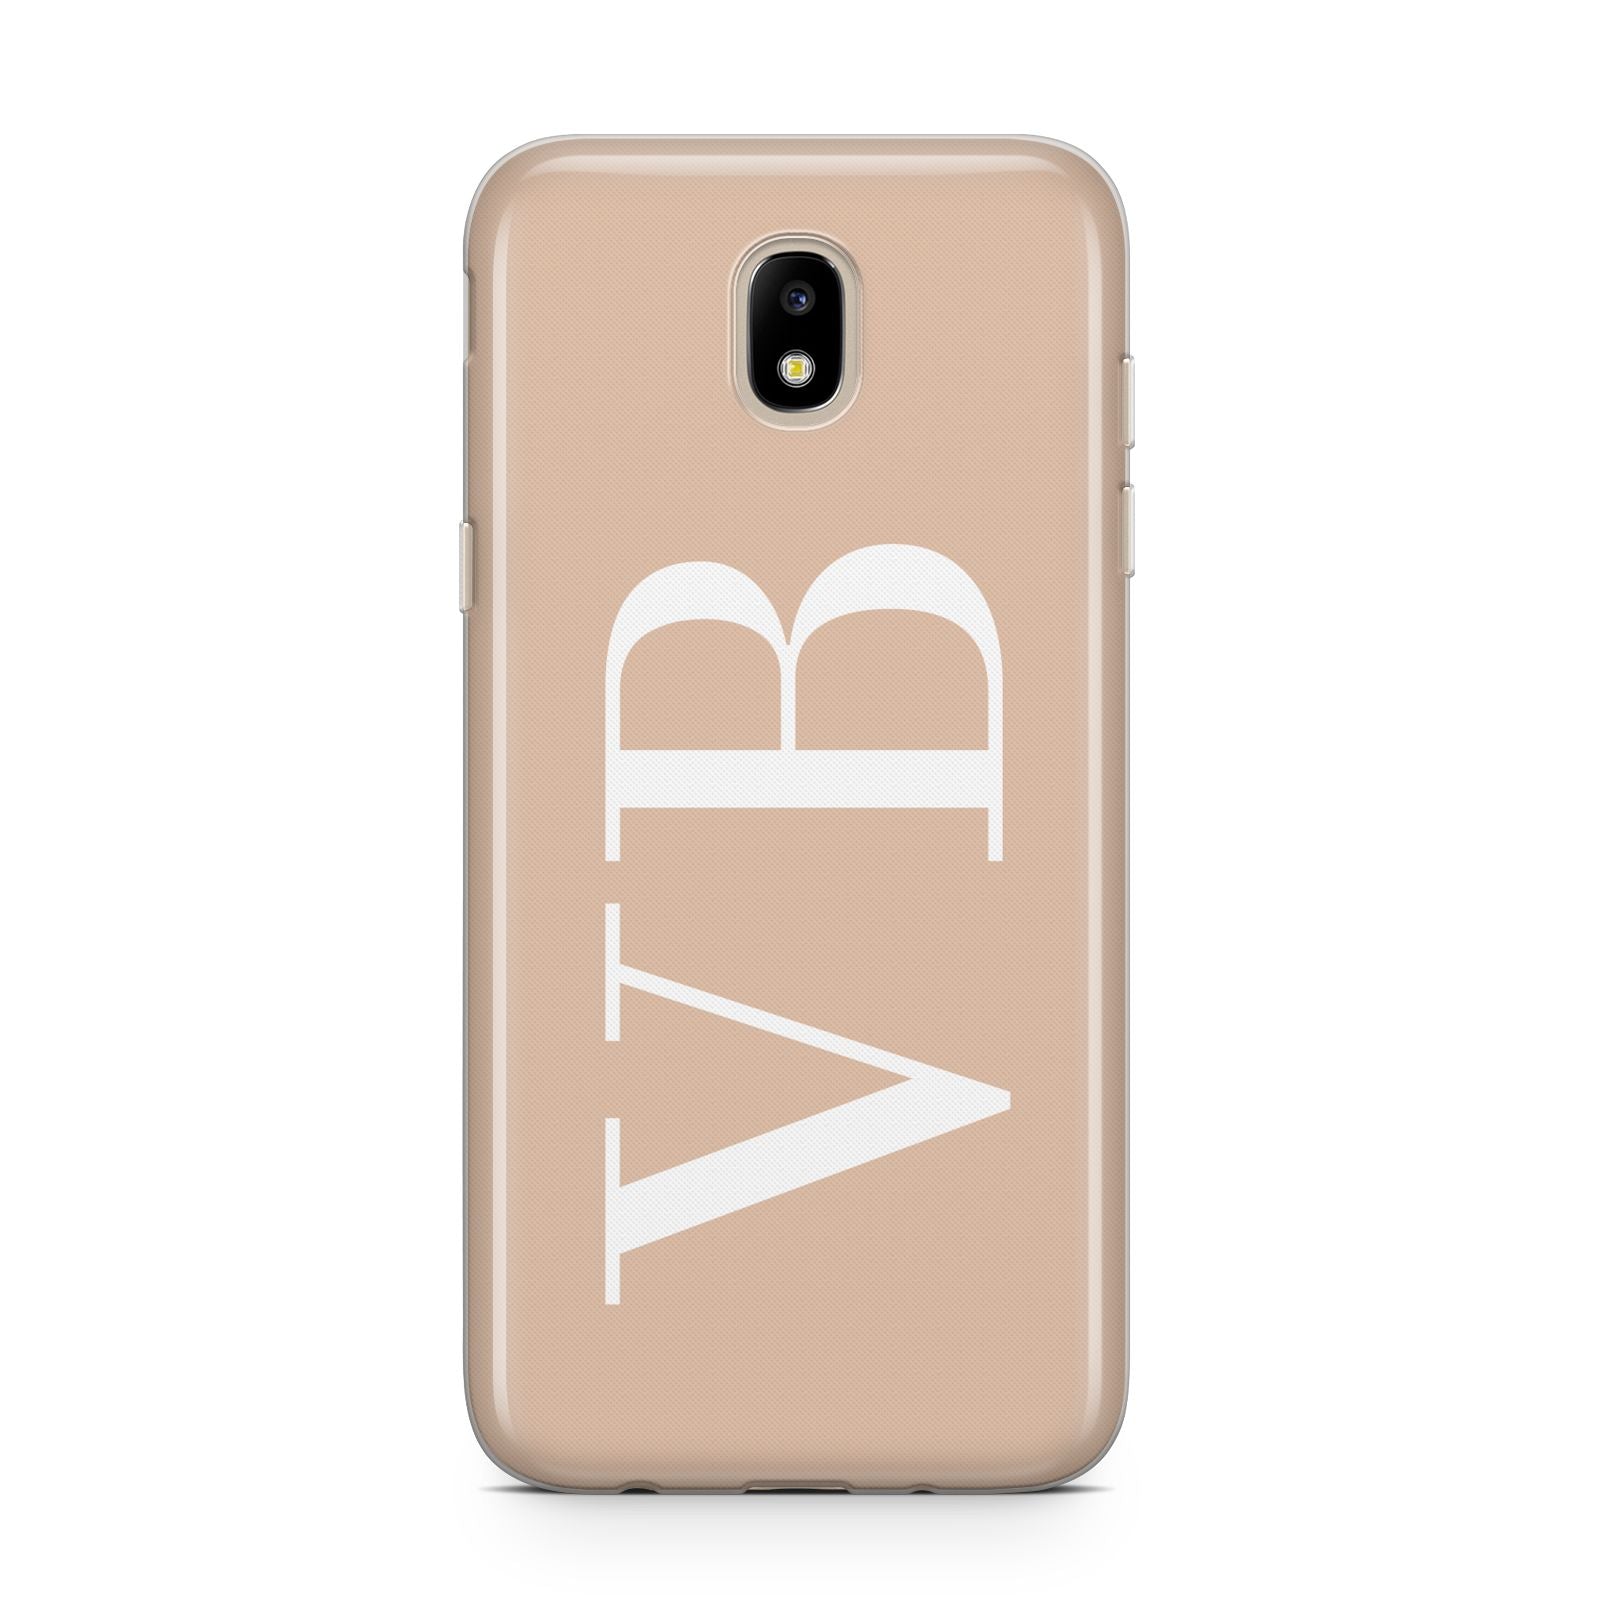 Nude And White Personalised Samsung J5 2017 Case